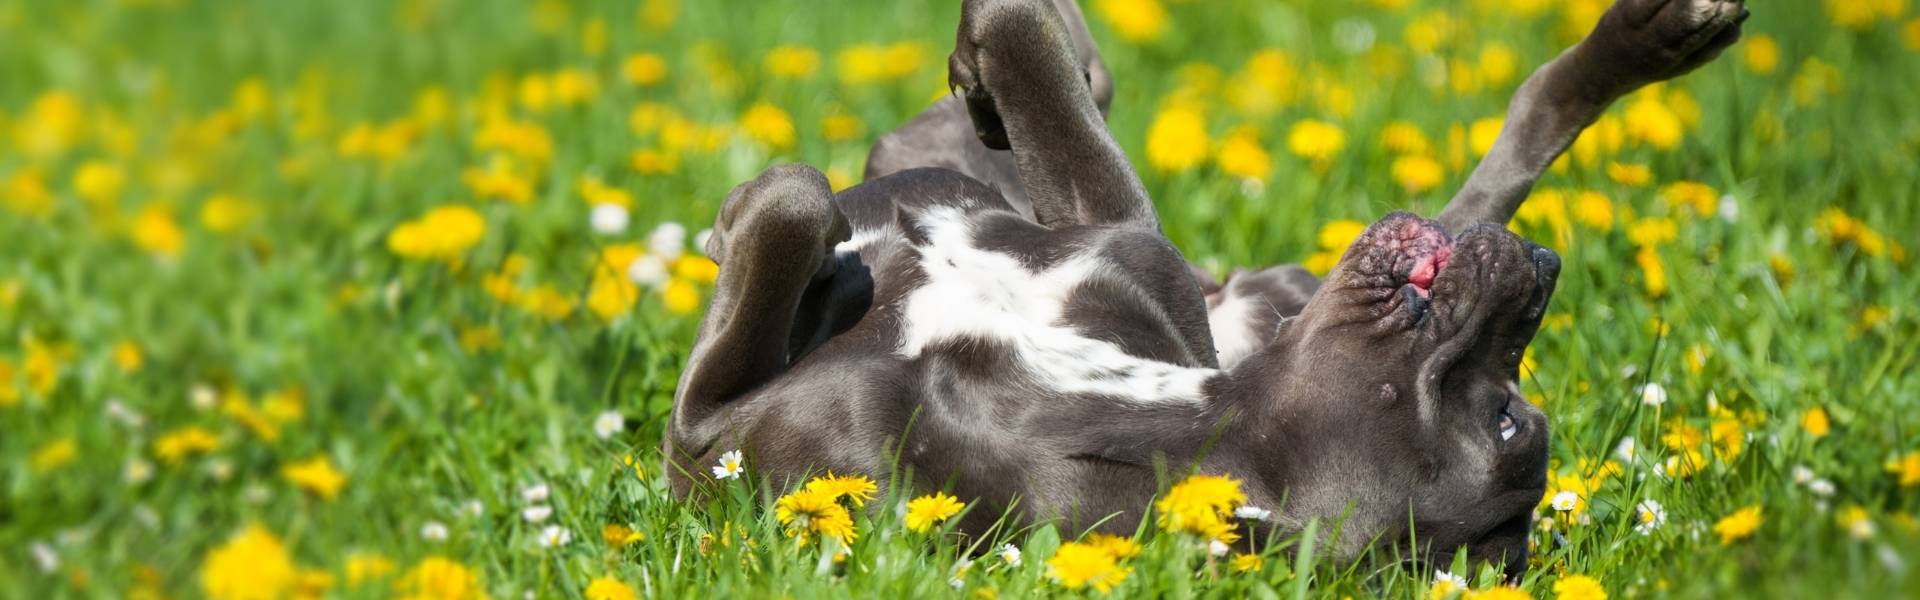 Keep dog springtime allergies in check (a survival guide)